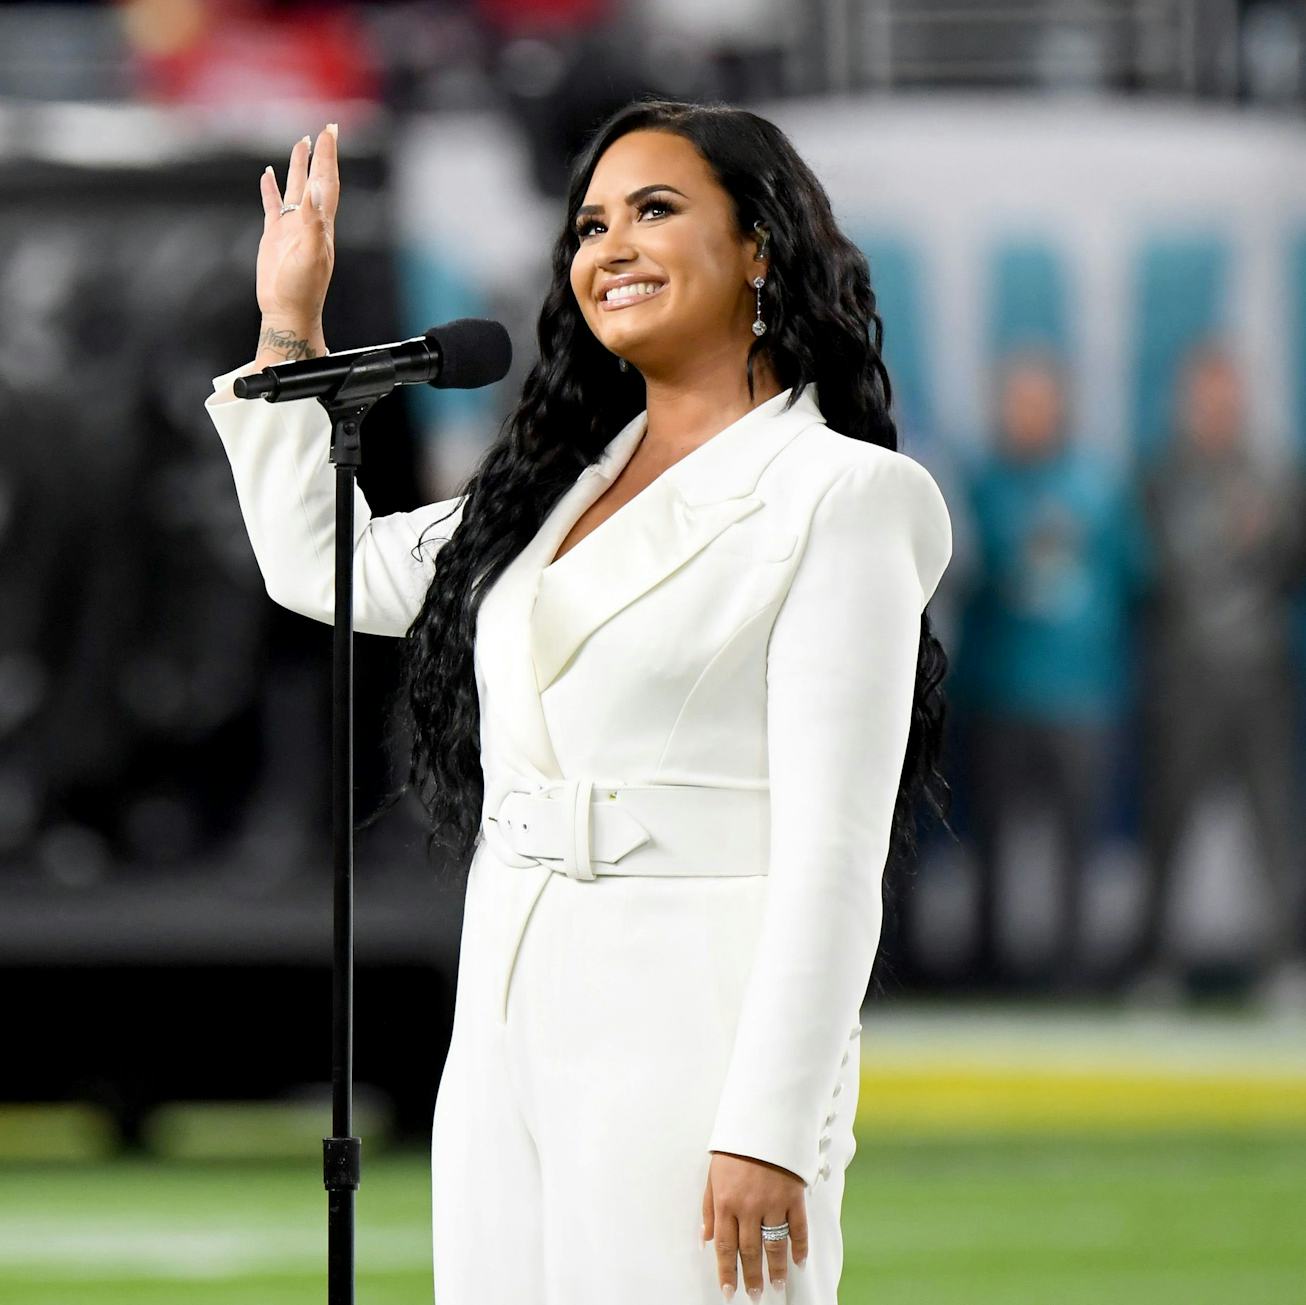 Demi Lovato performs the National Anthem onstage during Super Bowl LIV at Hard Rock Stadium on Febru...